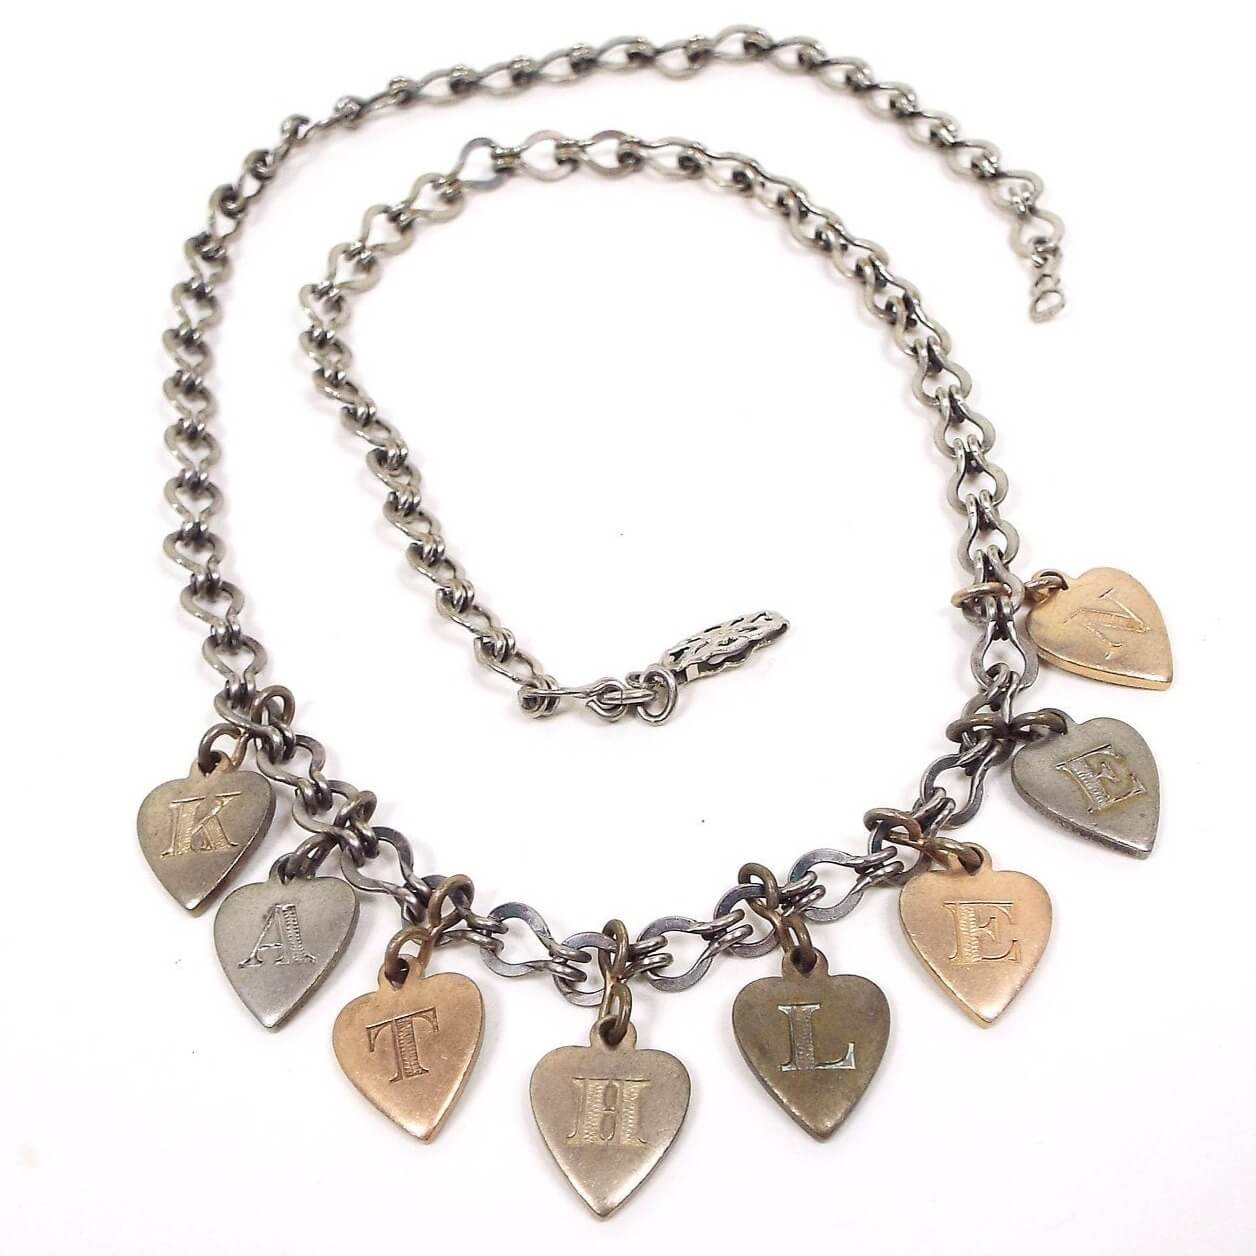 Front view of the Mid Century vintage heart charm name necklace. The chain has fancy style links and a filigree hinge clasp at the end. There are heart charms hanging from the bottom in different metal colors and each one has a letter engraved on it. All together they spell out the name Kathleen.